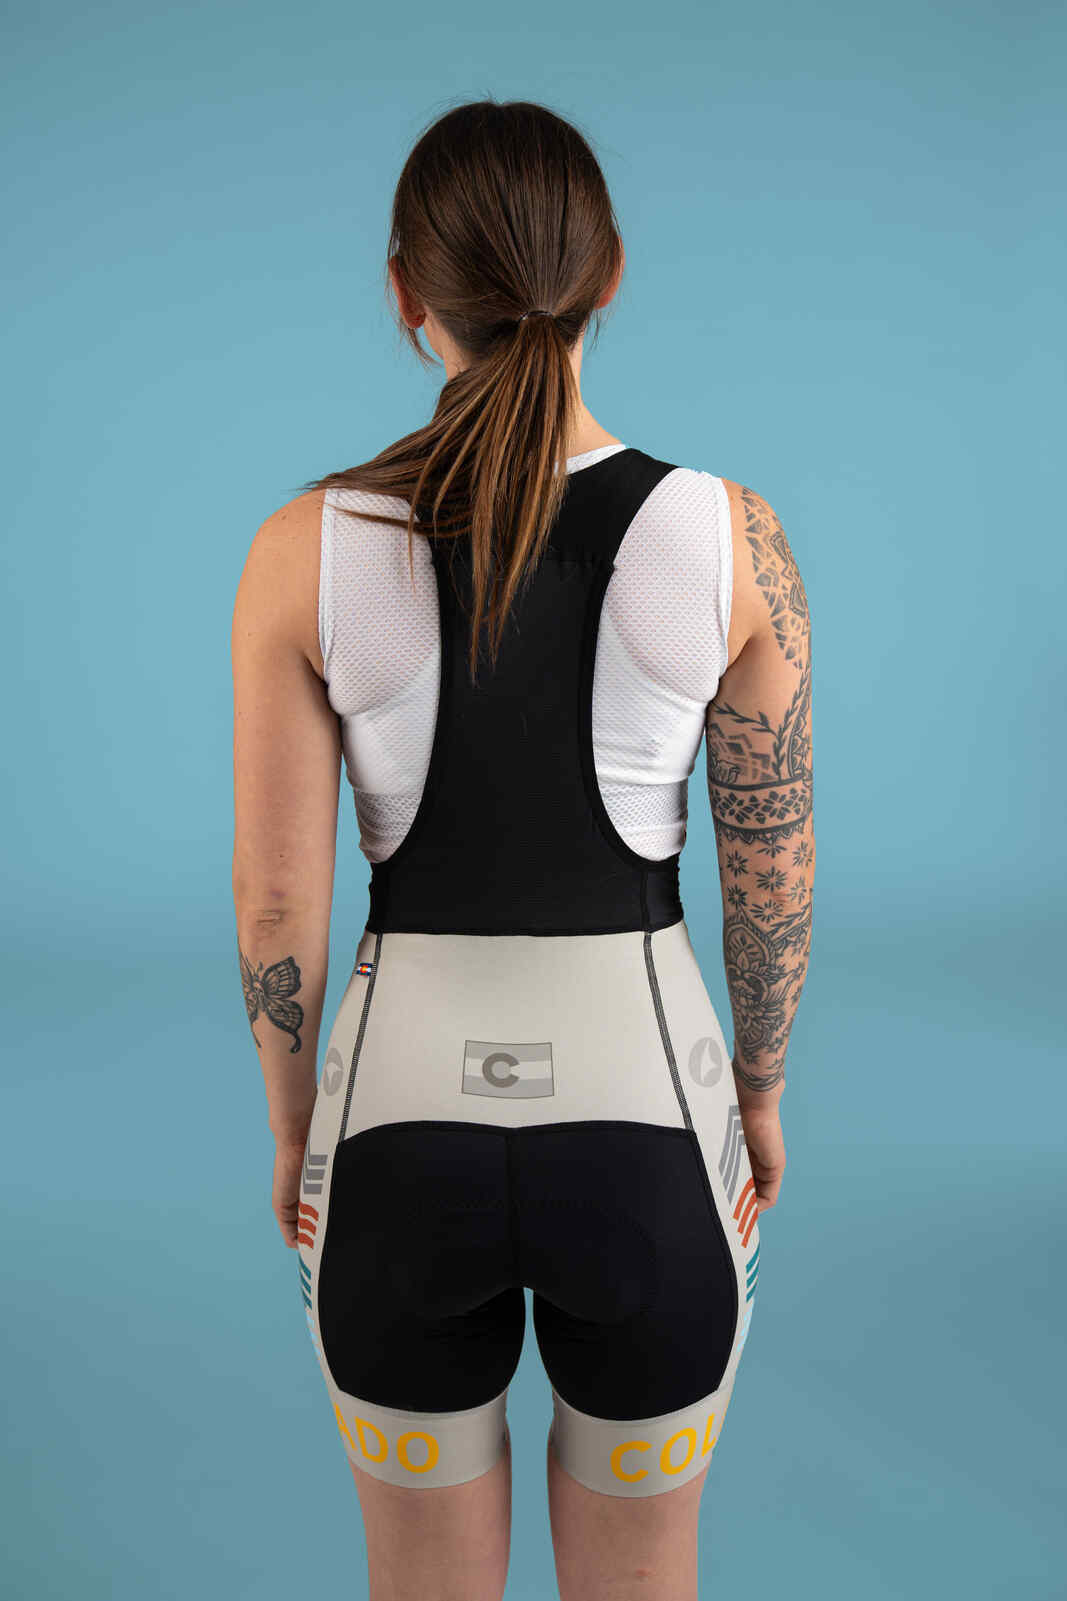 Women's White Colorado Cycling Bibs - Back Uppers